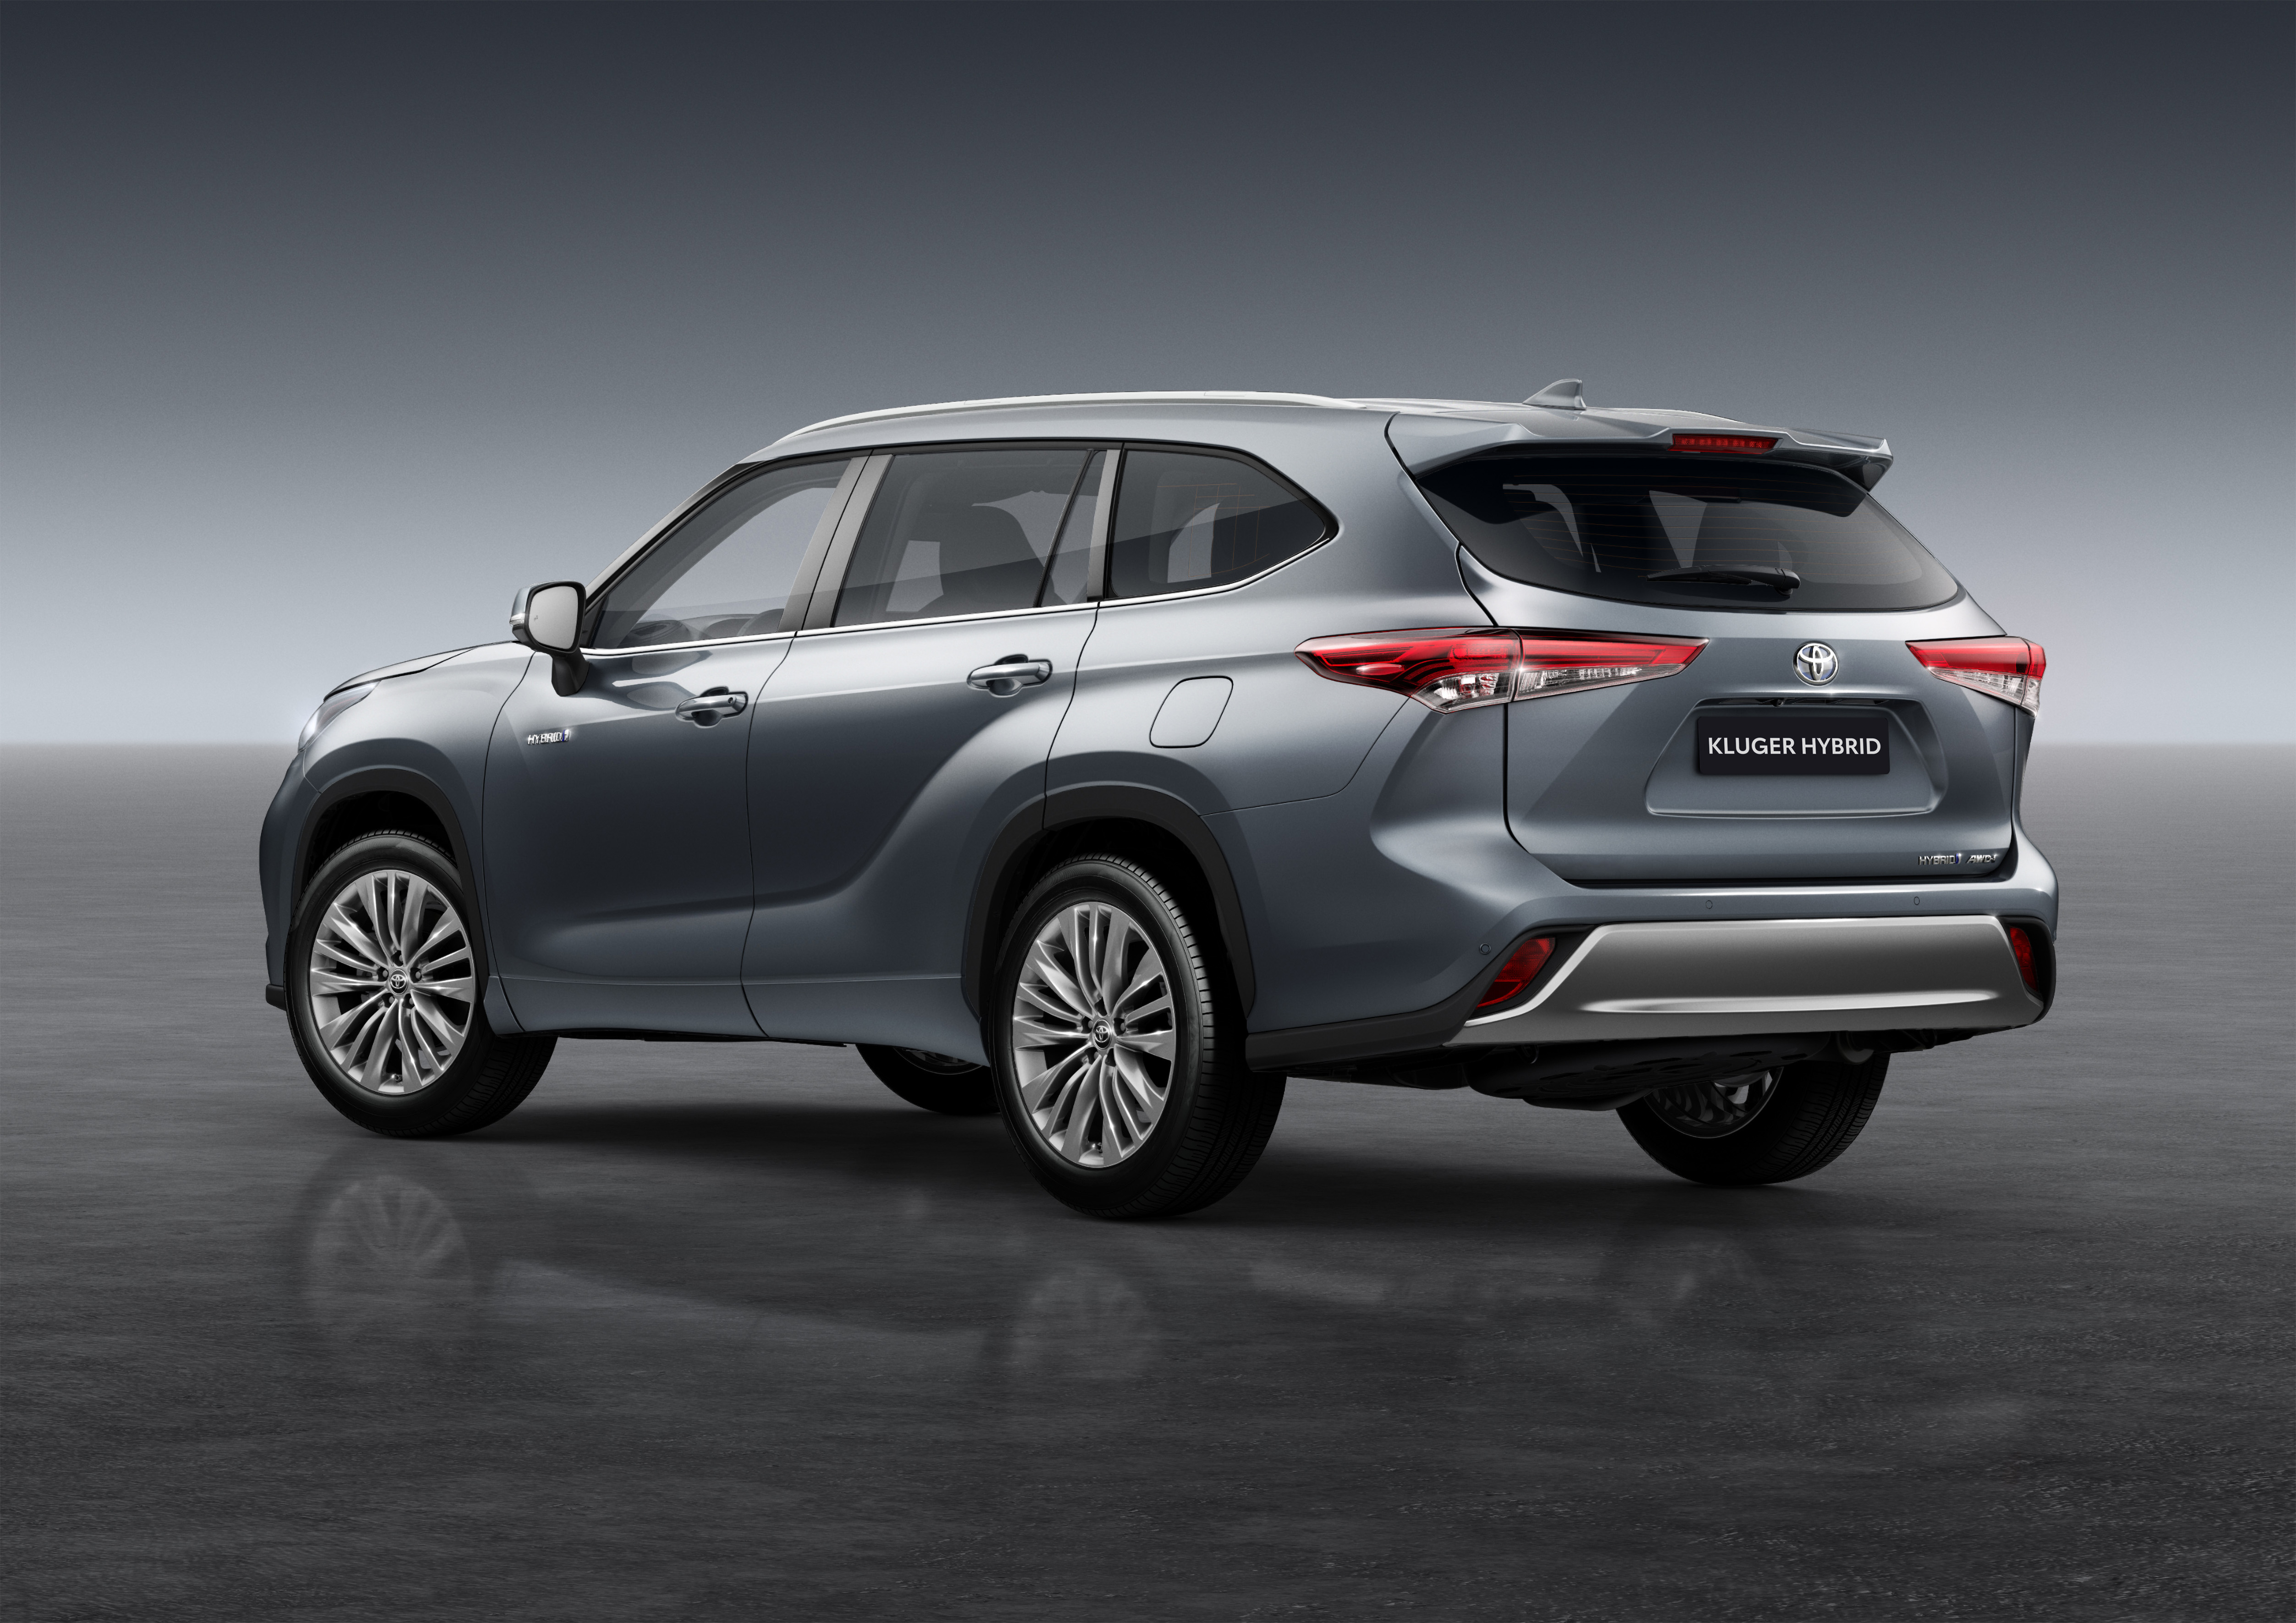 All new Toyota Kluger - coming soon to Sunshine Toyota on the Sunshine Coast! Register your interest today!